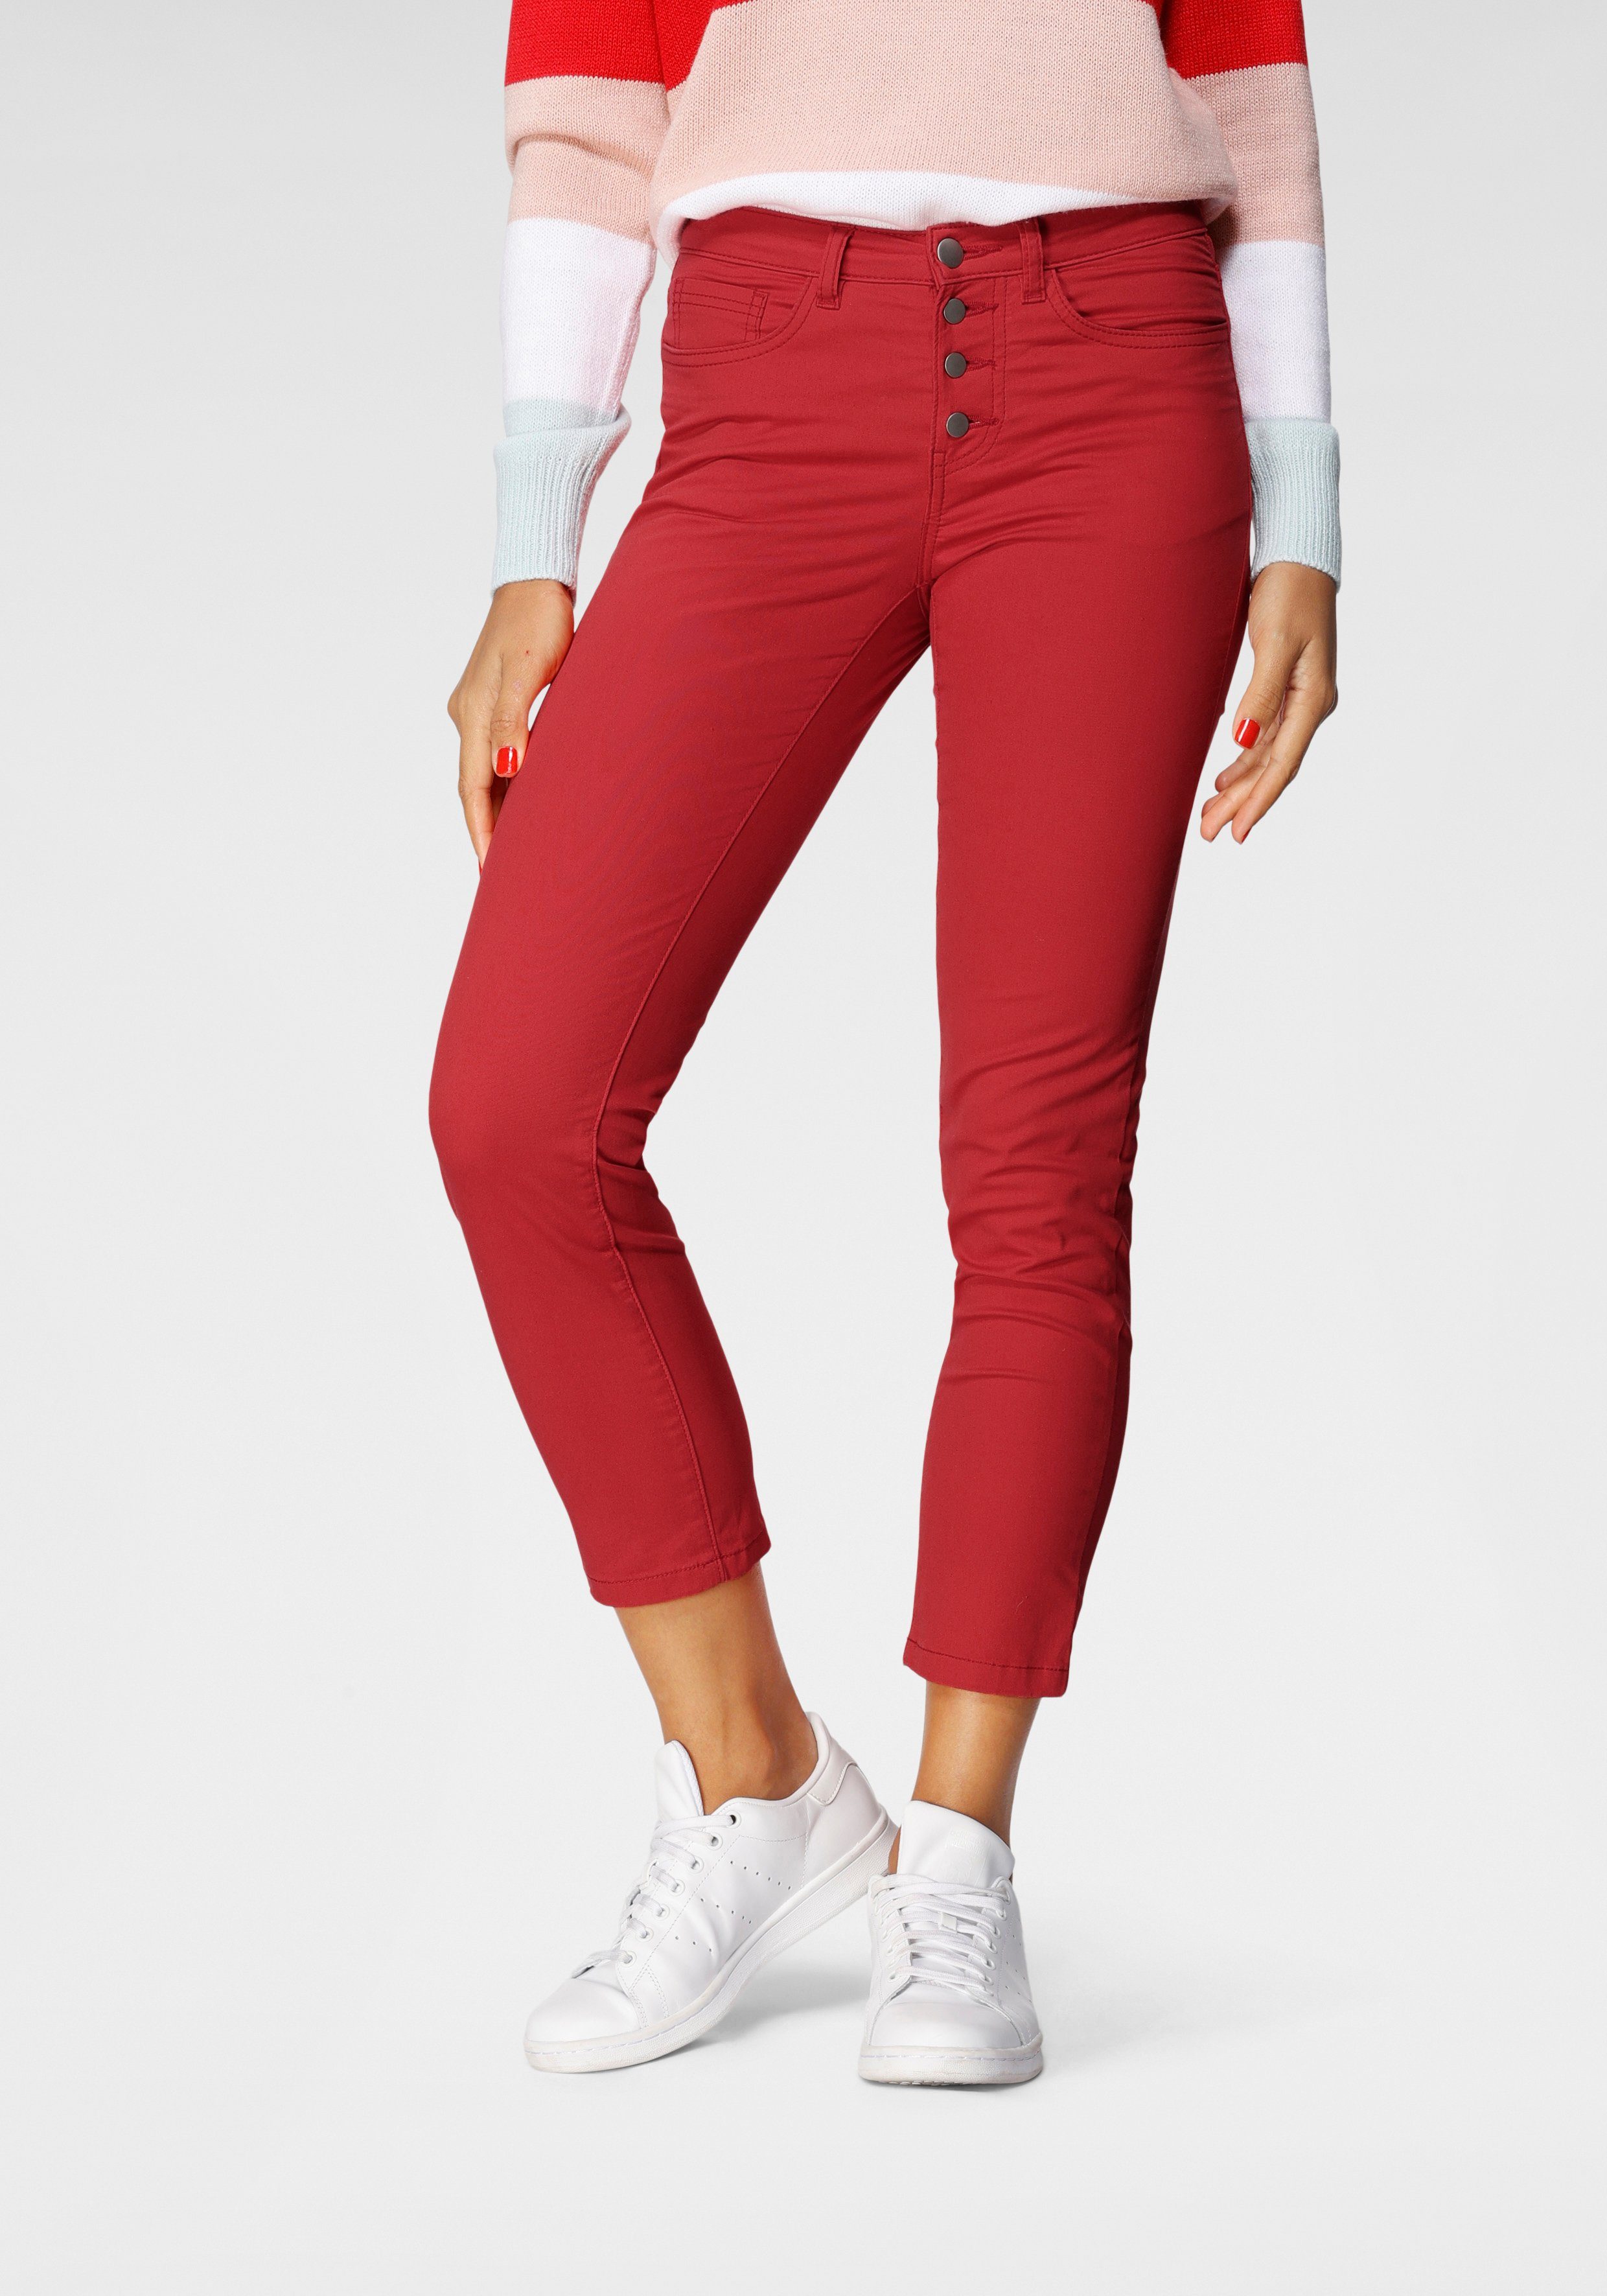 Rote 7/8-Jeans online kaufen » Rote Cropped Jeans | OTTO